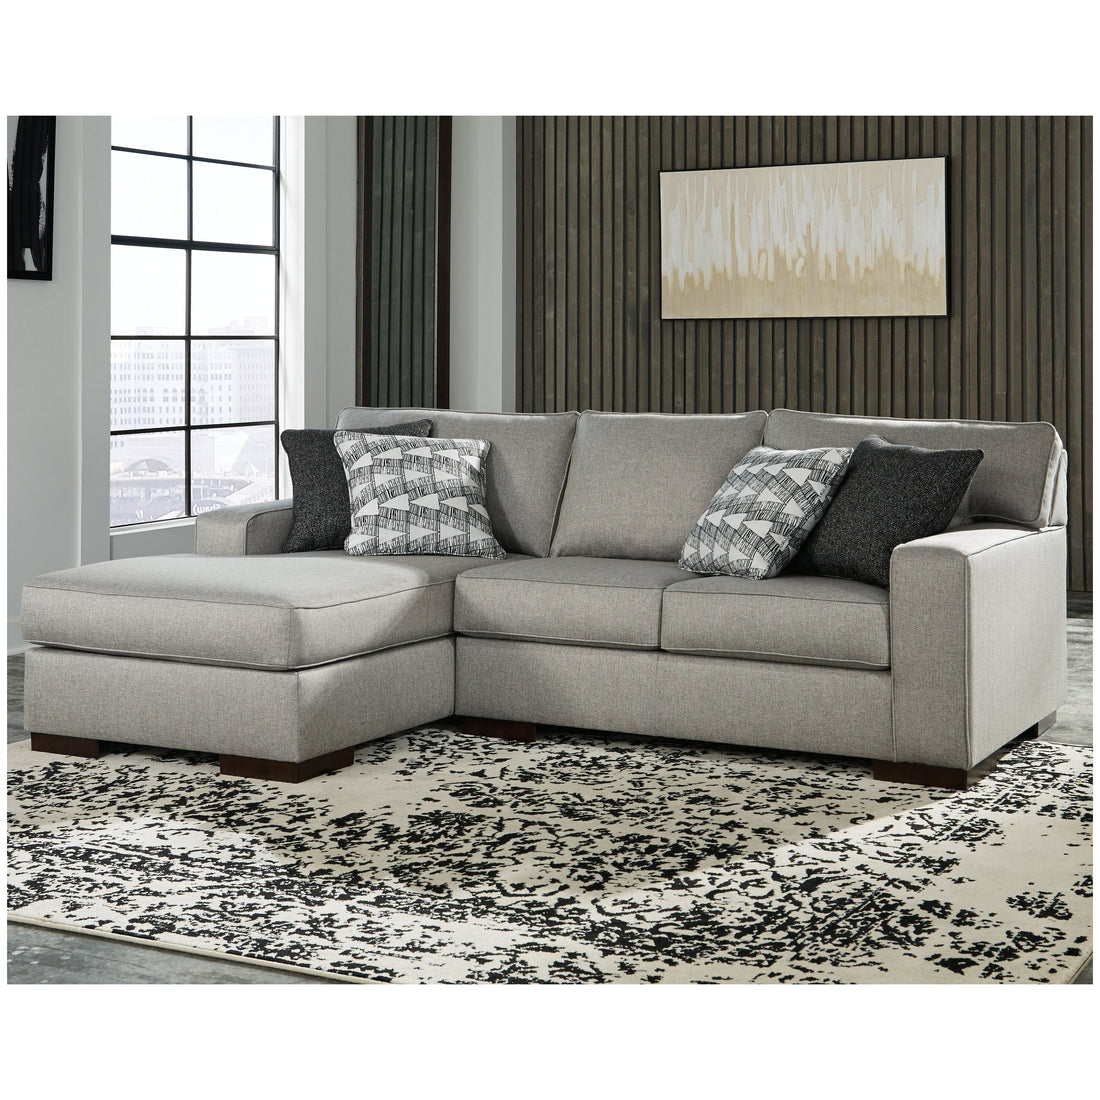 Marsing Nuvella 2-Piece Sectional with Chaise Ash-41902S1